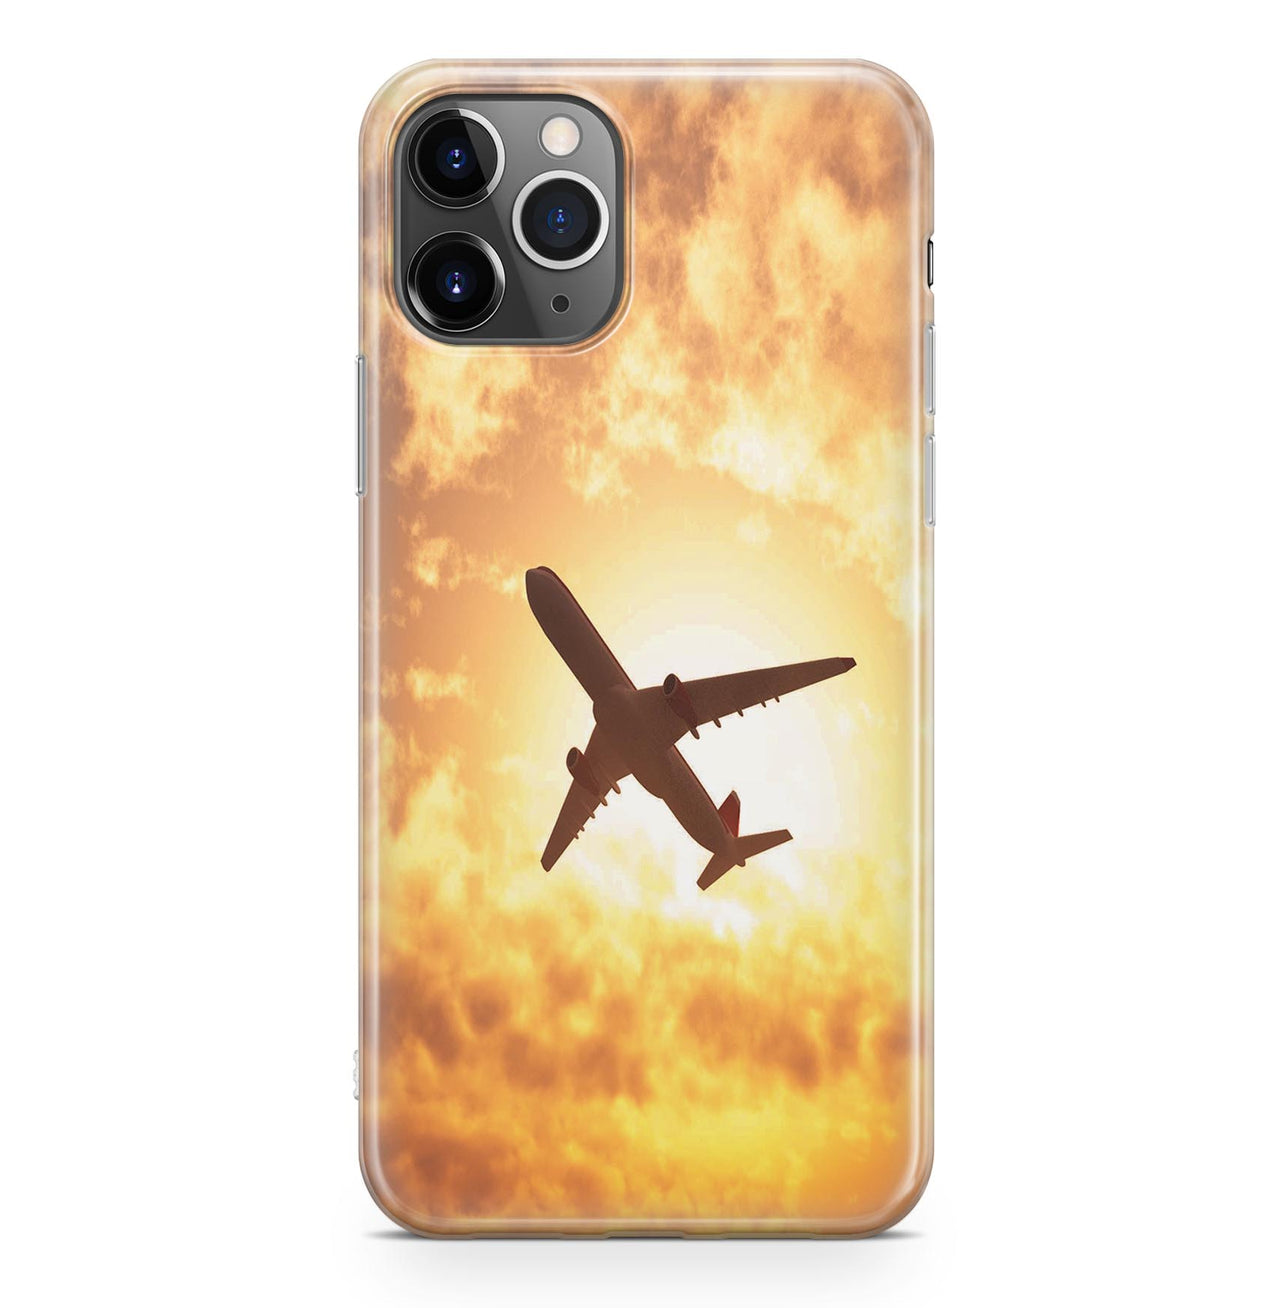 Plane Passing By Designed iPhone Cases